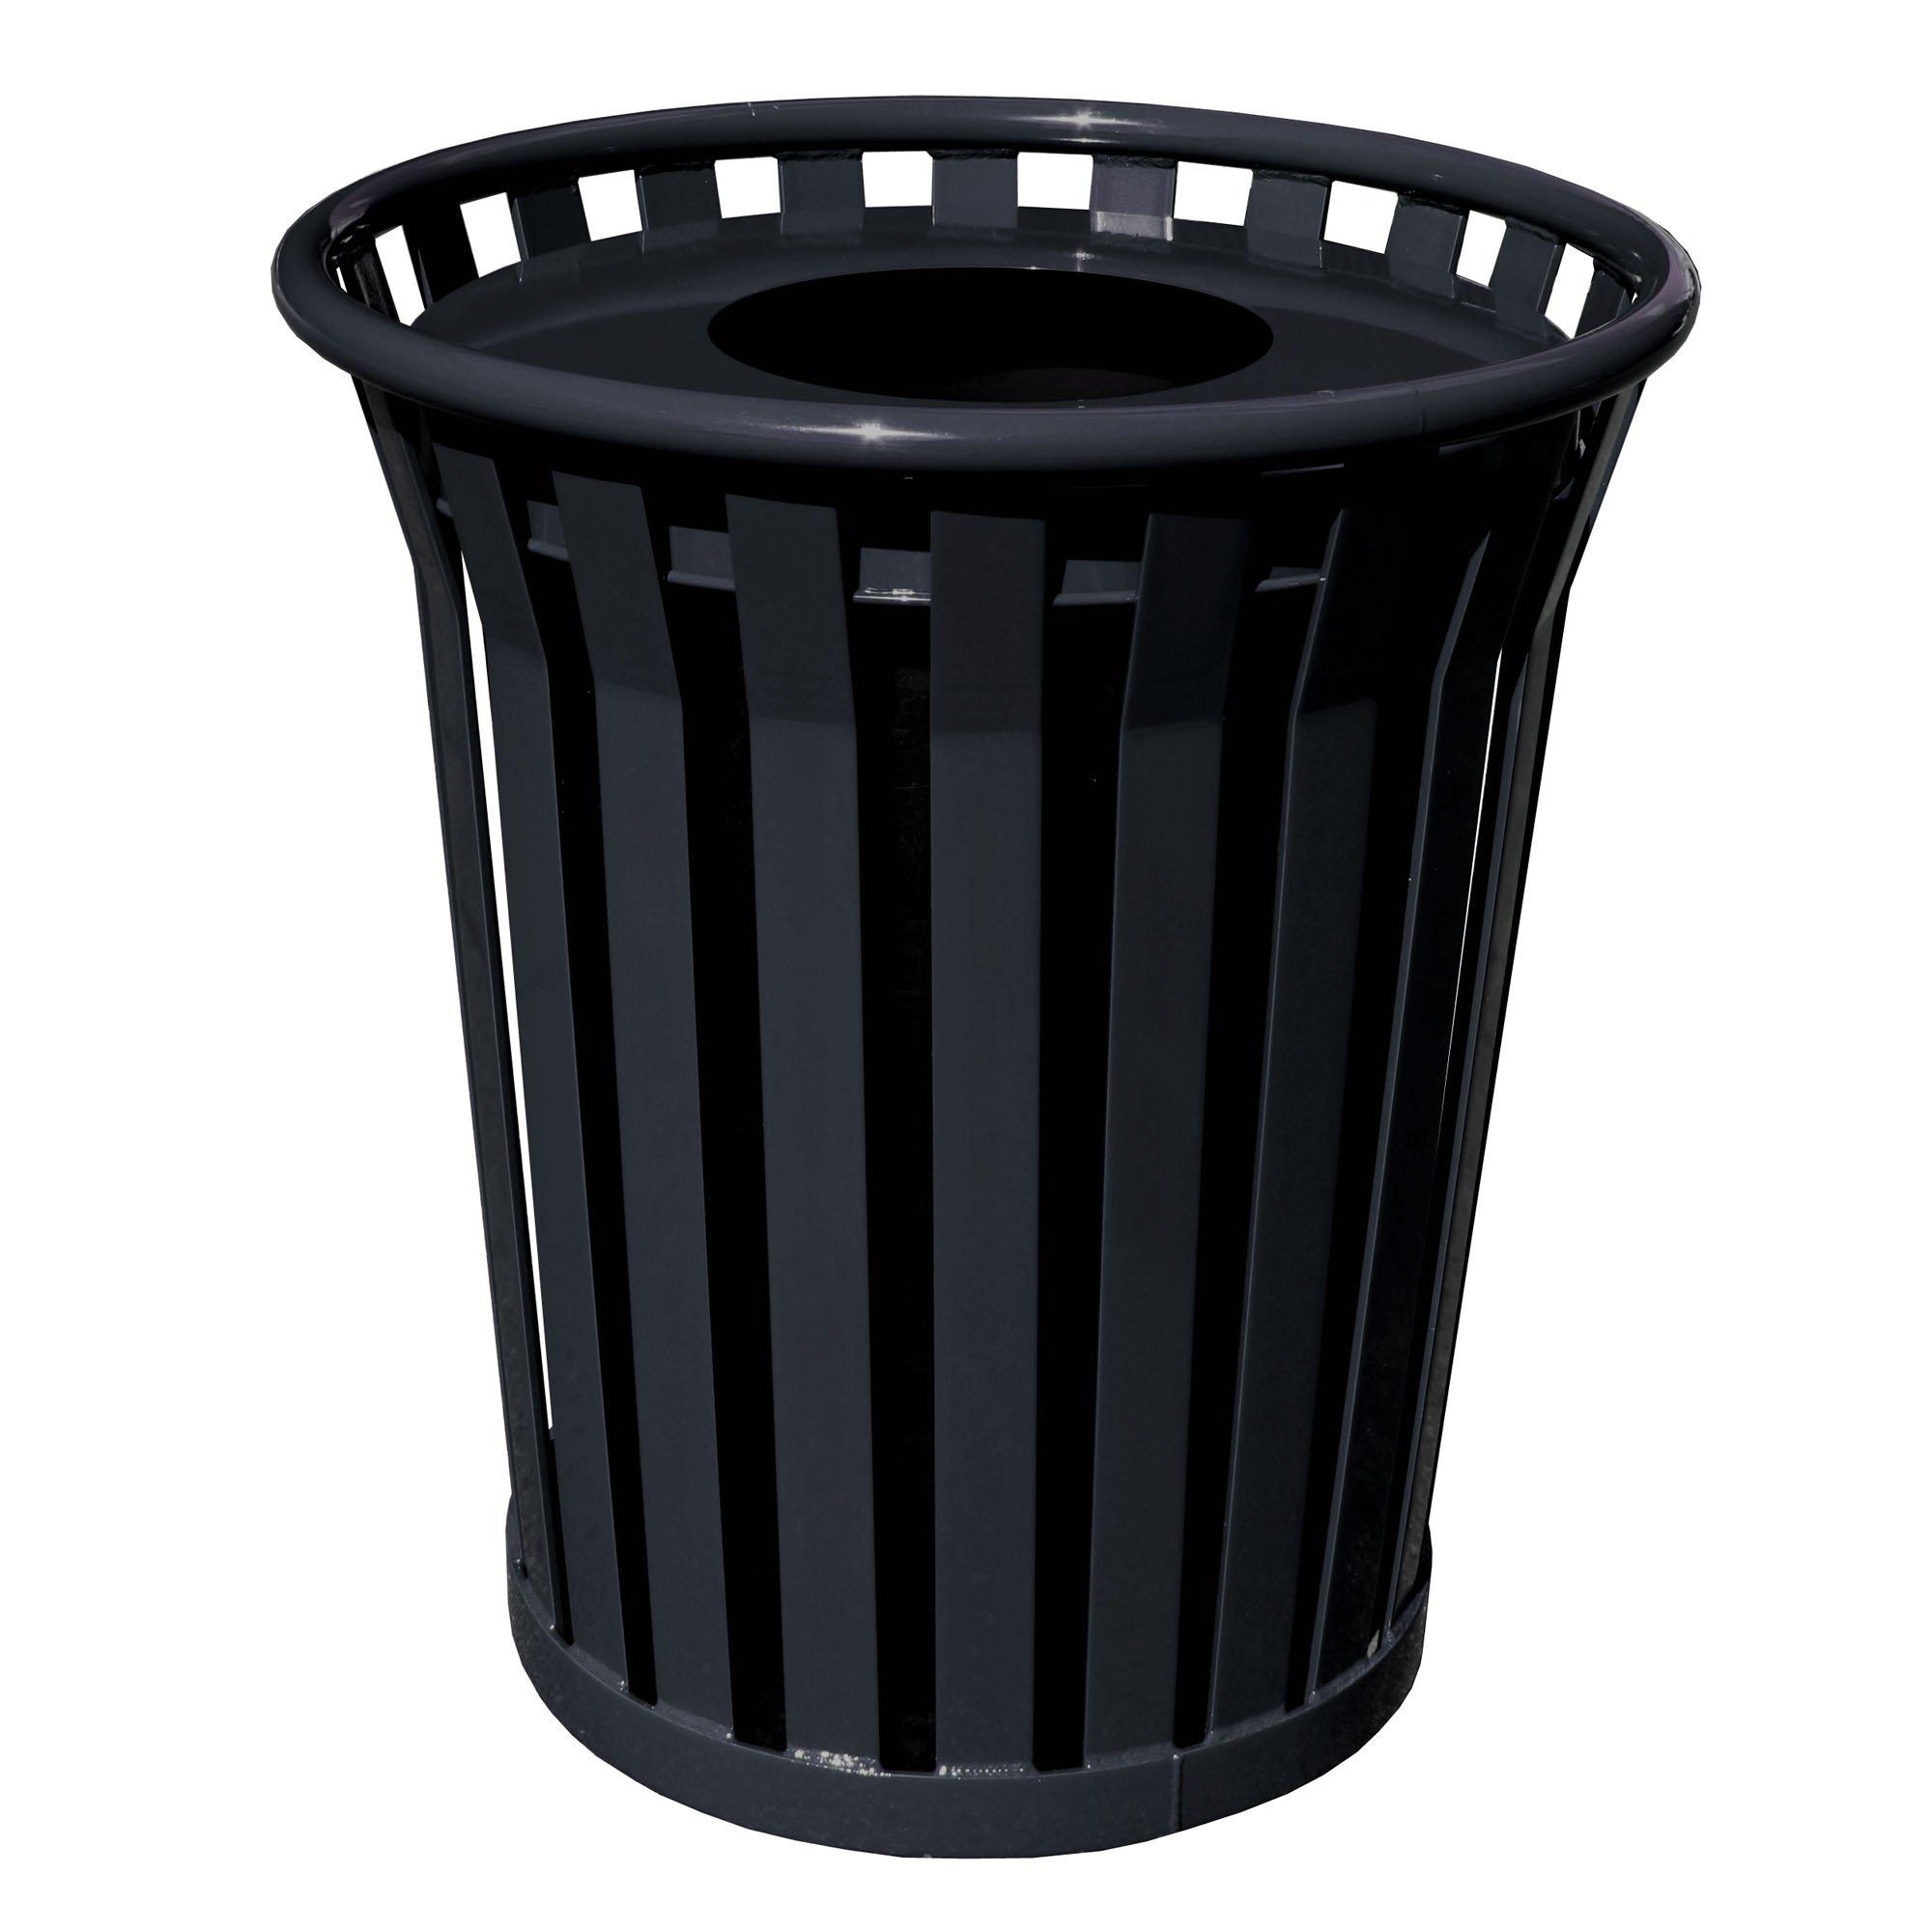 Wydman Collection Heavy Duty Slatted Outdoor Trash Receptacle with Flat Top Lid, 36-Gallon Capacity